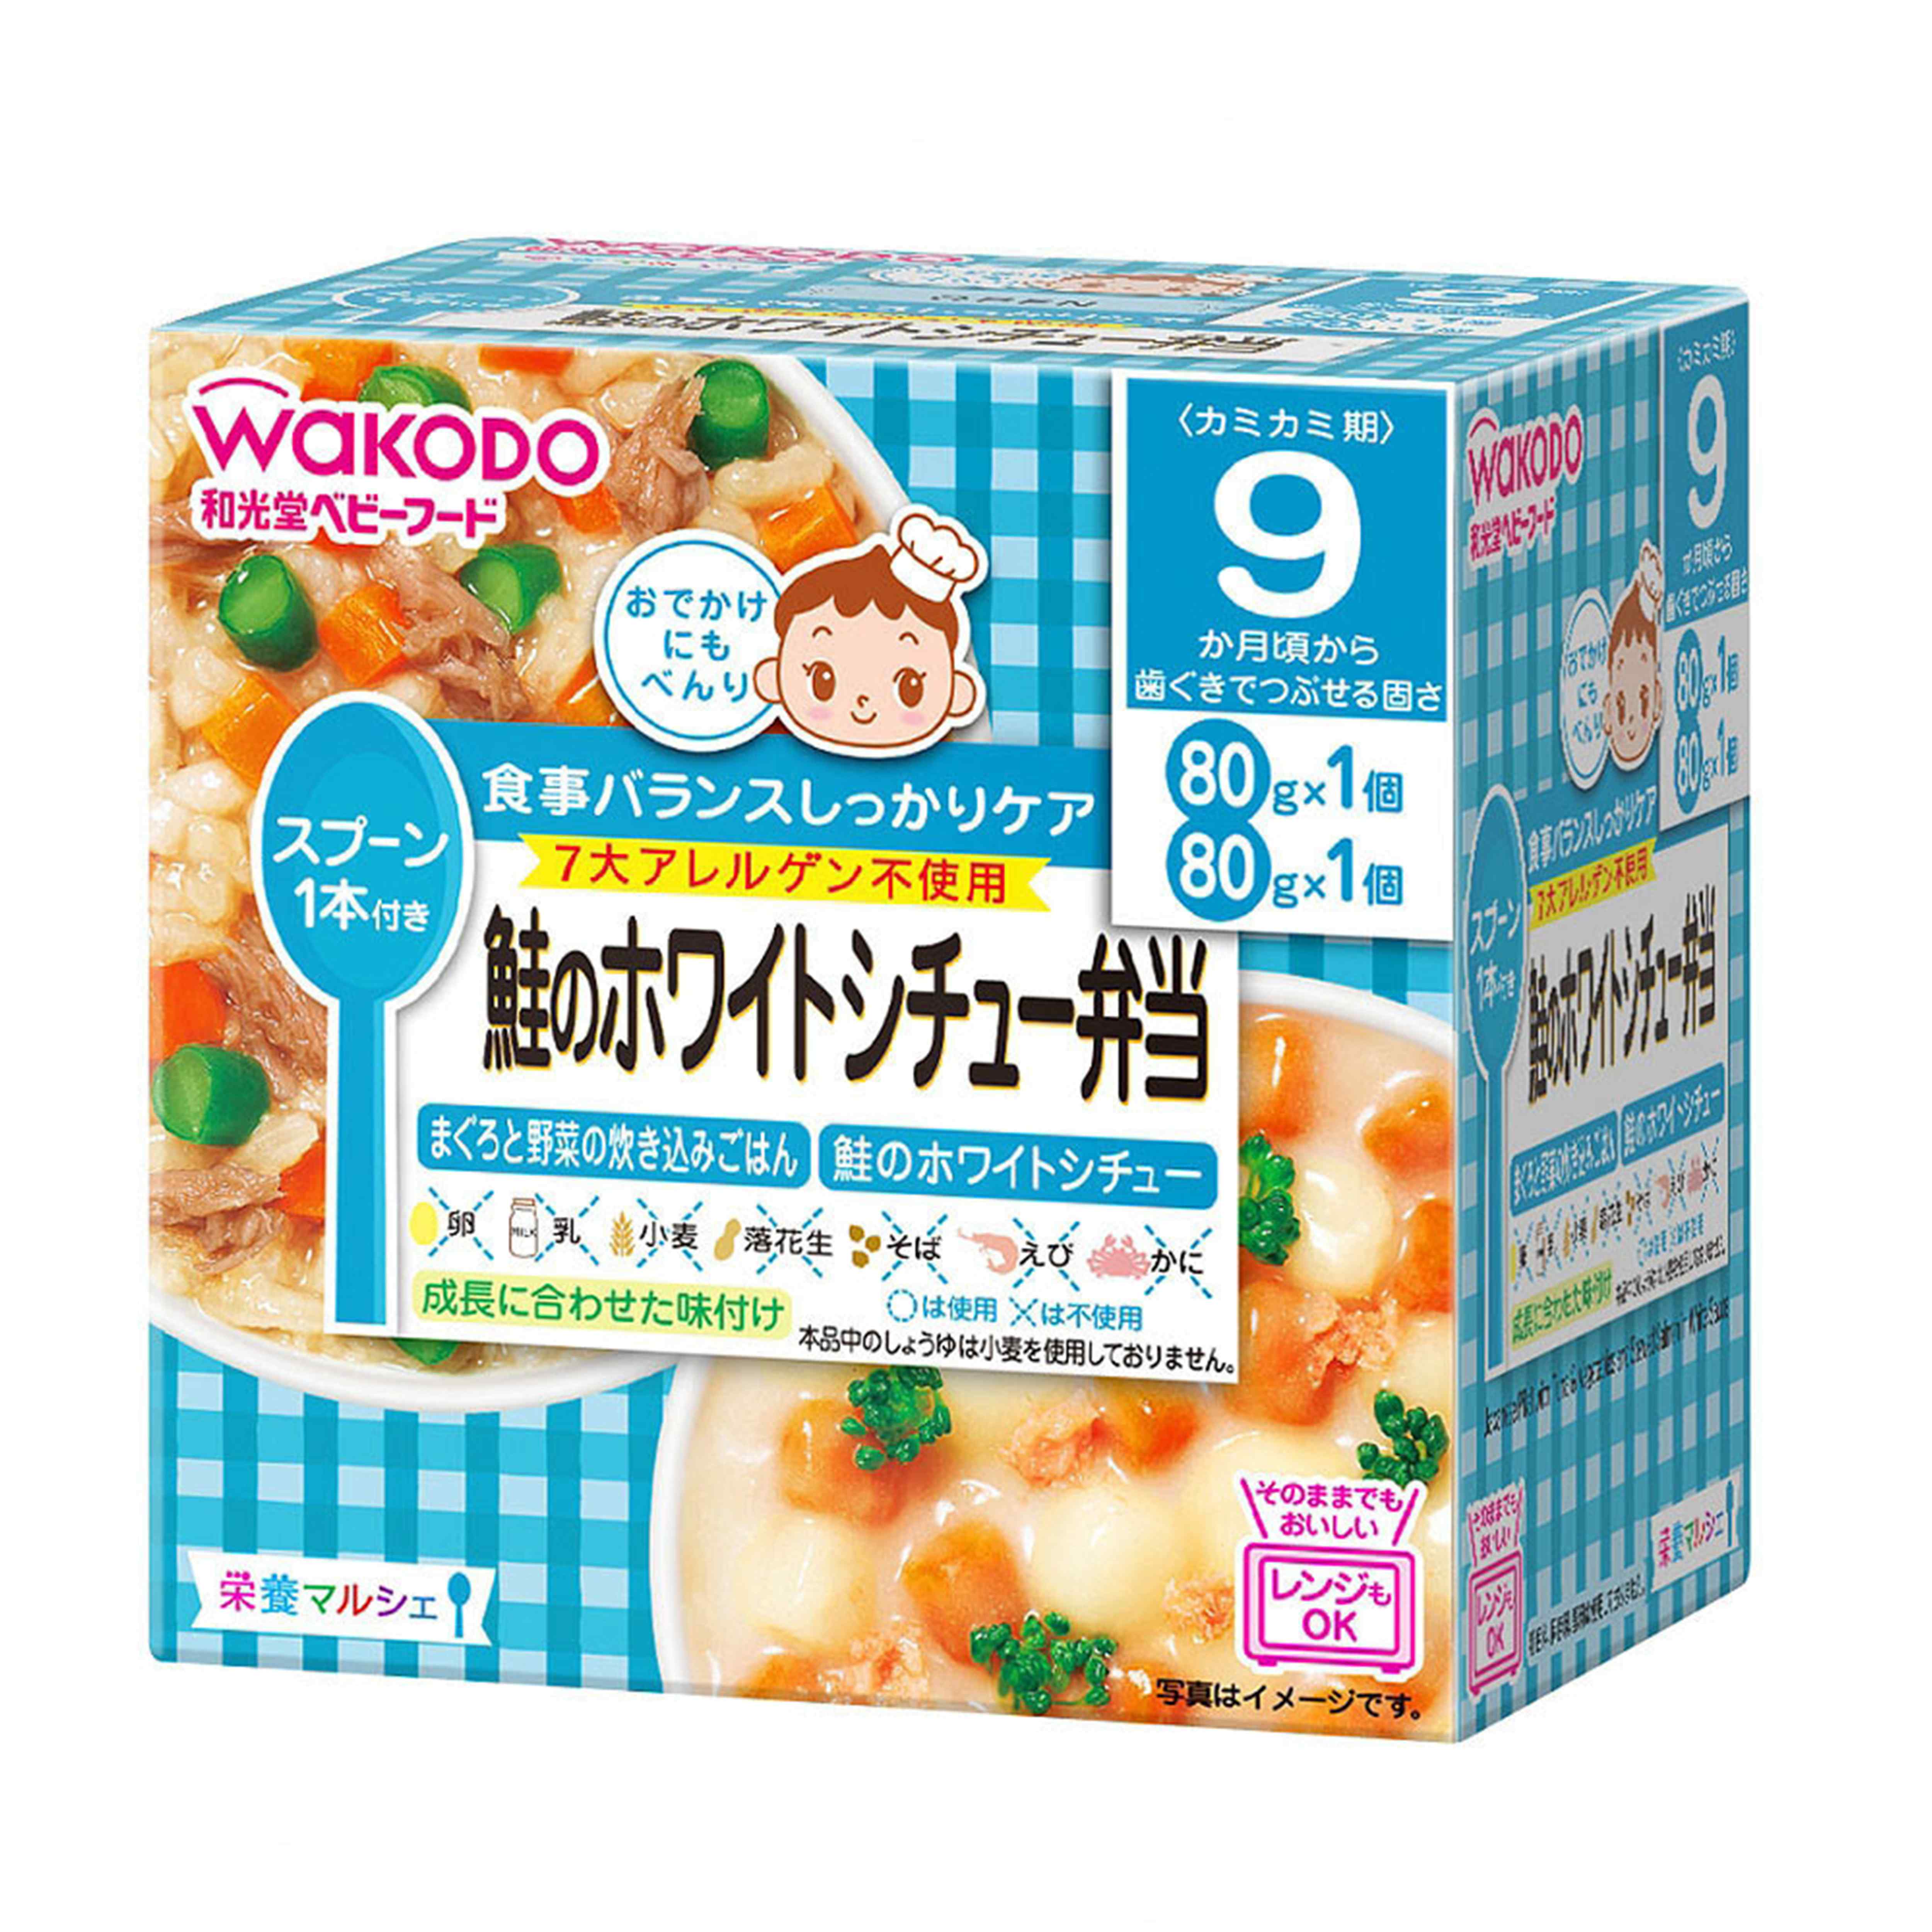 WAKODO Japanese Pilaf With Tuna And Vegetables And Stewed Salmon In White Sauce (Bundle of 4)